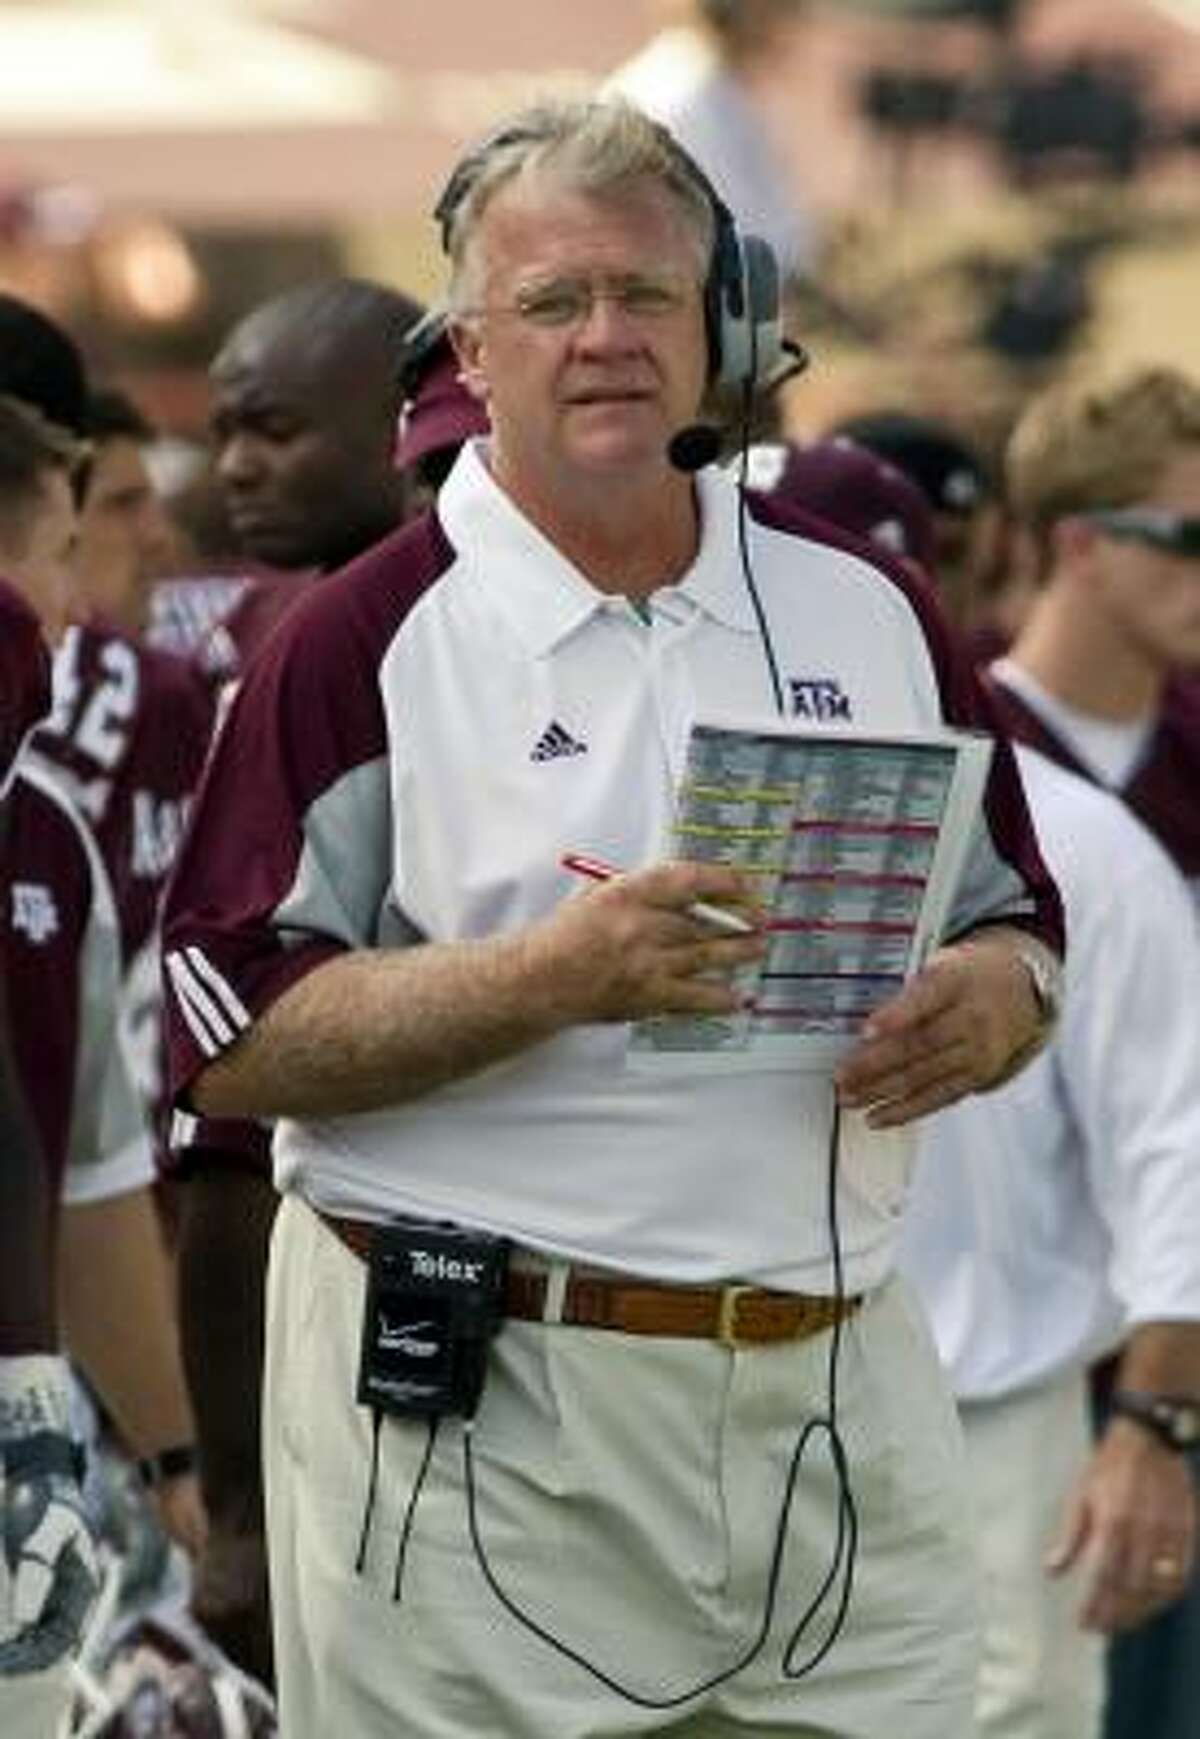 Aggies complaining about Mike Sherman after one season don't understand the program he inherited, the reconstruction he had to do.